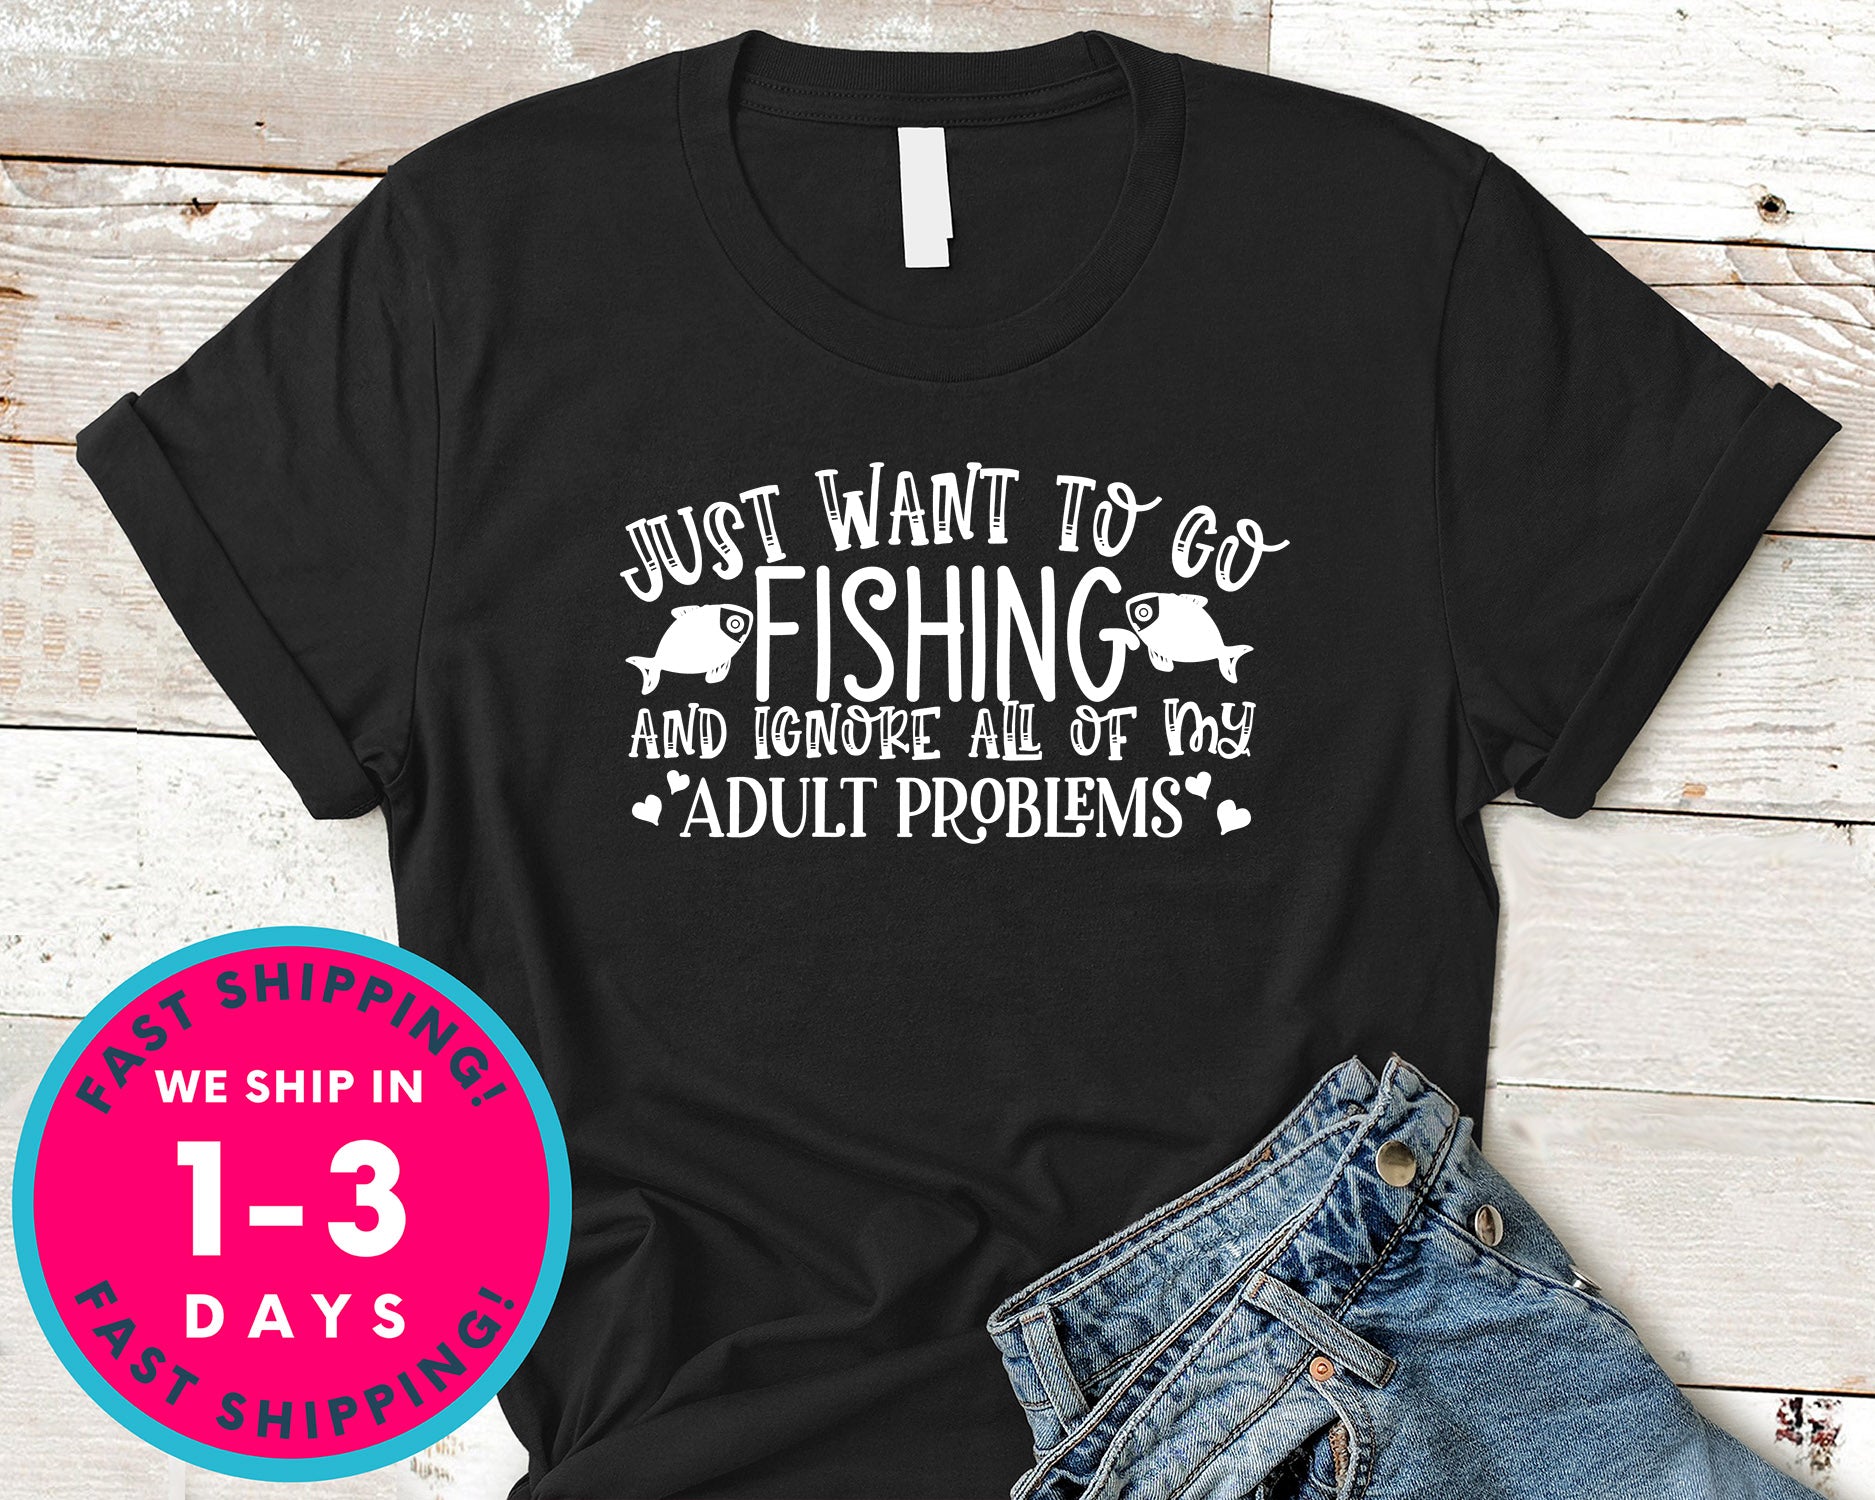 I Just Want To Go Fishing And Ignore All Of My Adult Problems